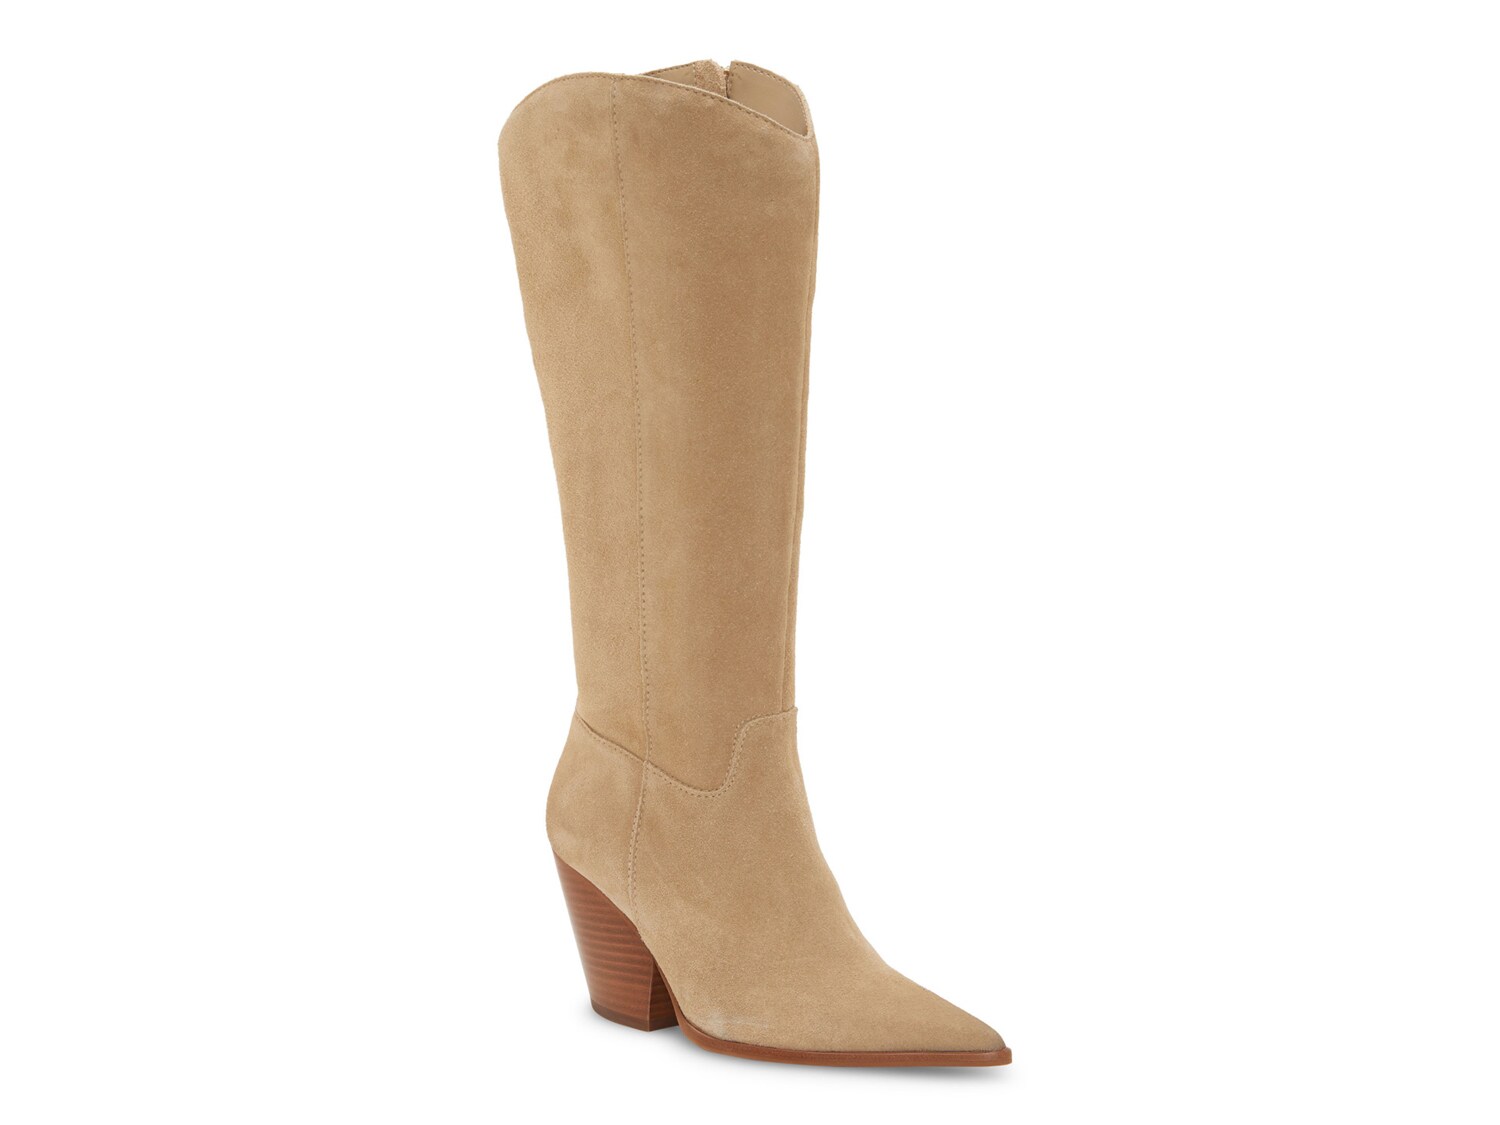 Vince Camuto Oyennda Wide Calf Boot - Free Shipping | DSW